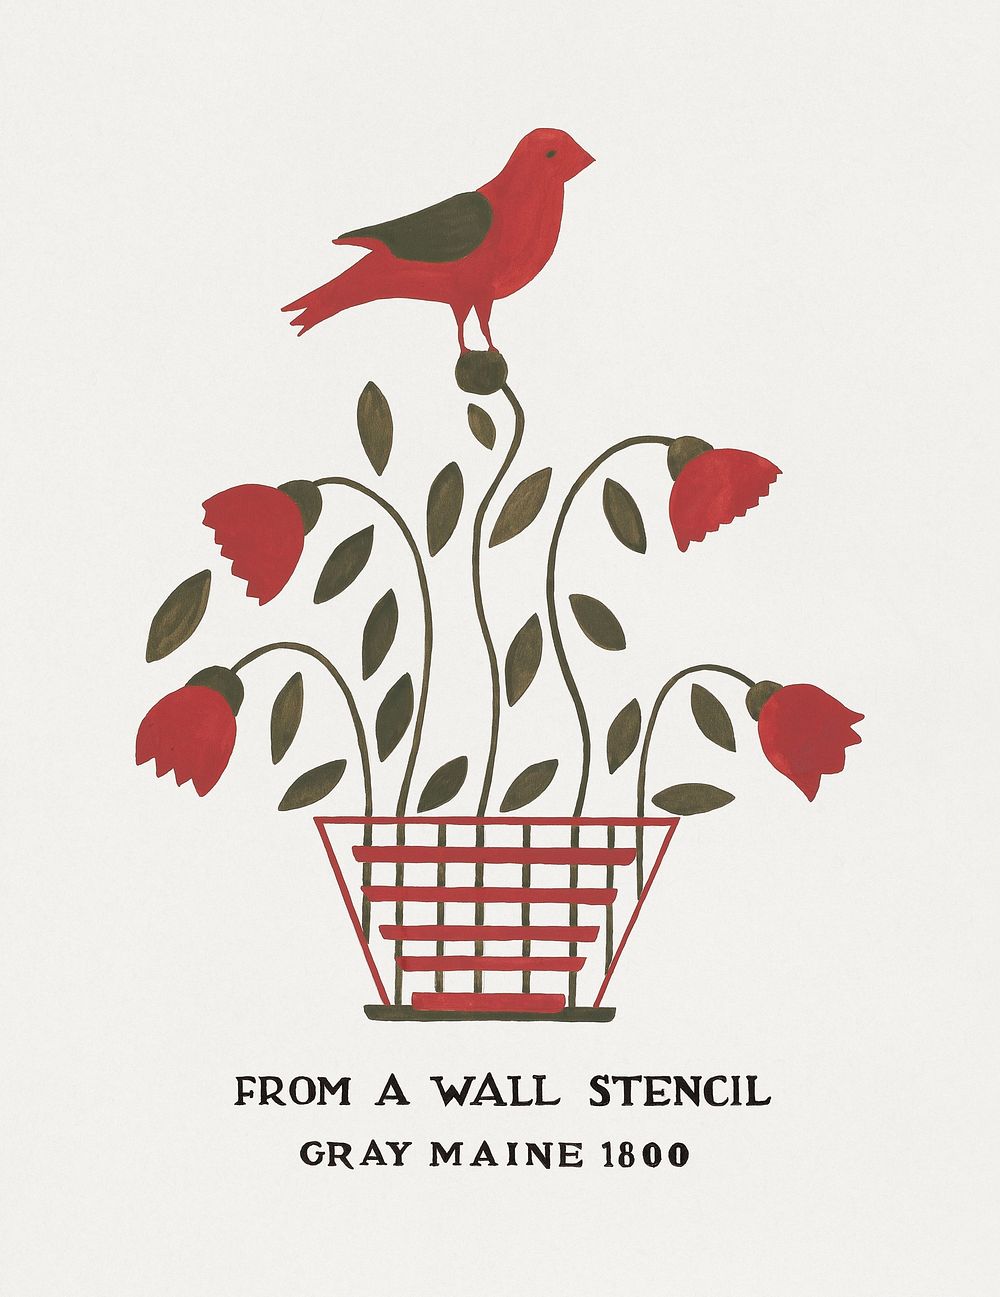 Design from Gray, Maine 1800 (no. 2): From Proposed Portfolio "Maine Wall Stencils" (1935&ndash;1942), vintage botanical…